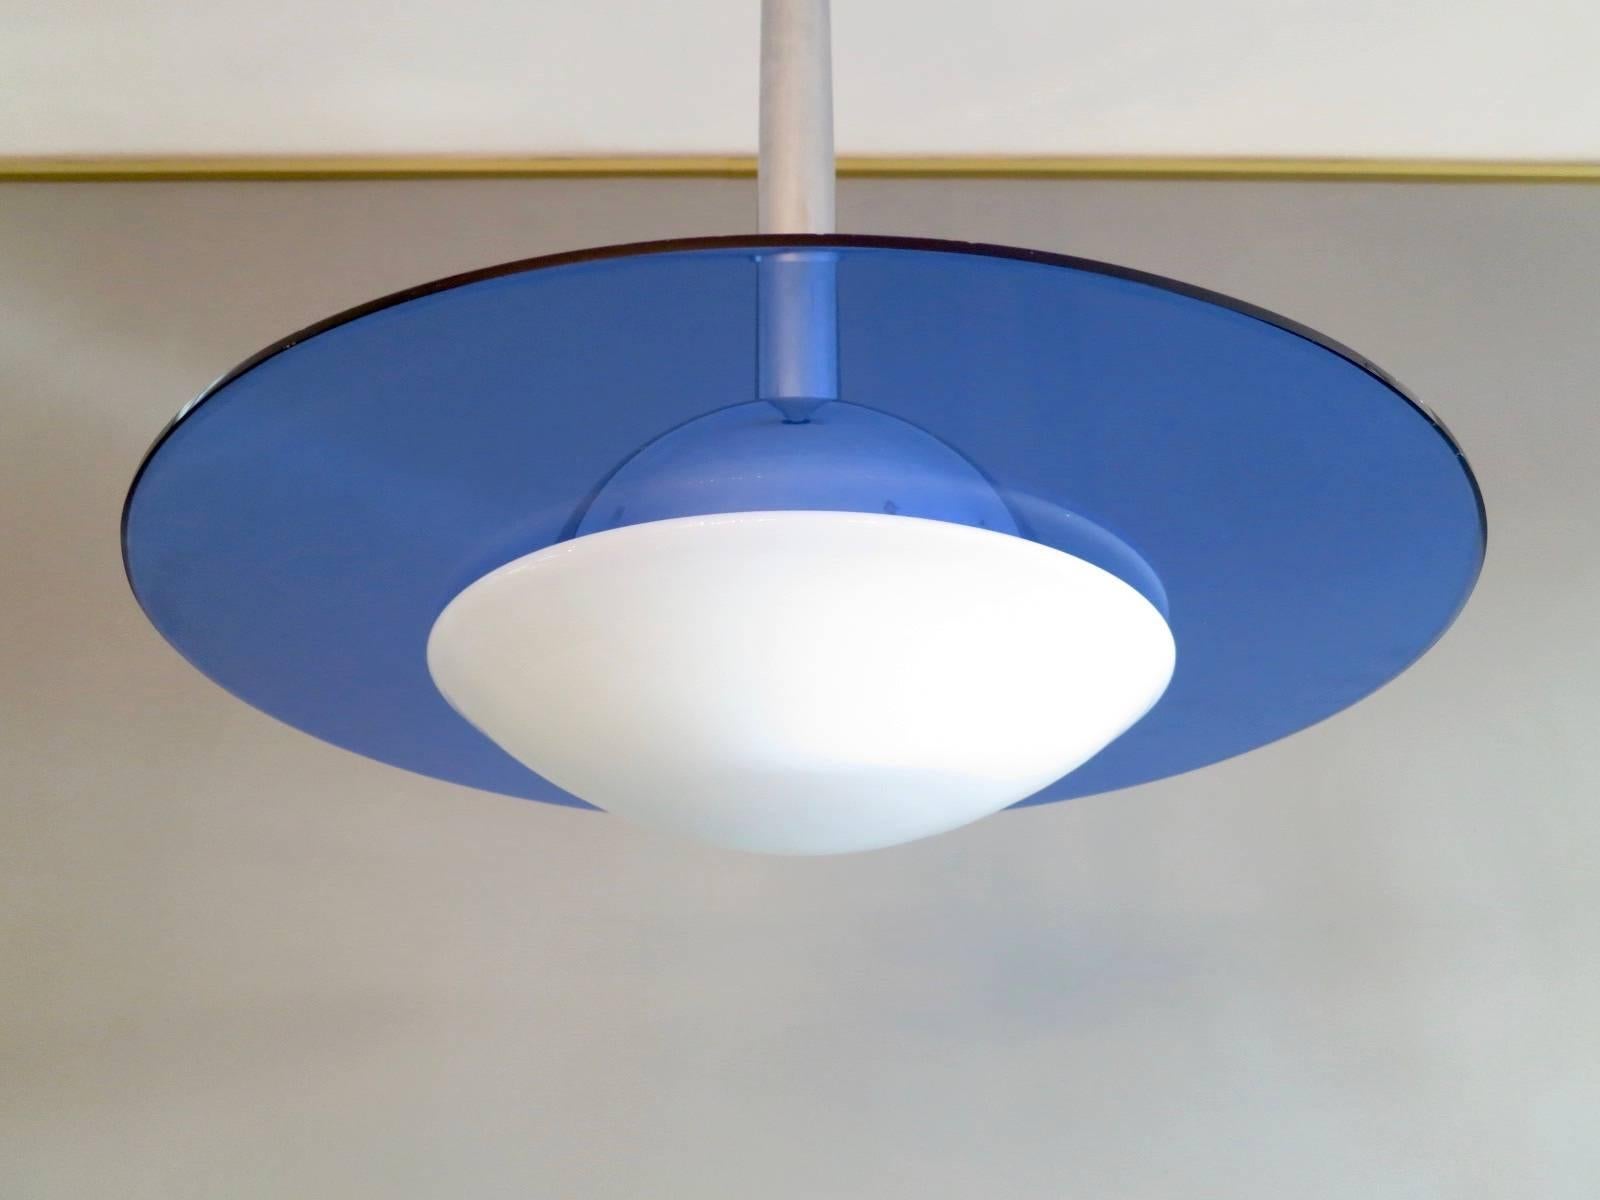 A Mid-Century pendant in chrome with blue glass and opaque glass diffusers. The chrome stem extending to give extra drop. A good quality piece in fantastic condition. 

Measures: Standard drop 93cm, extended 130cm.